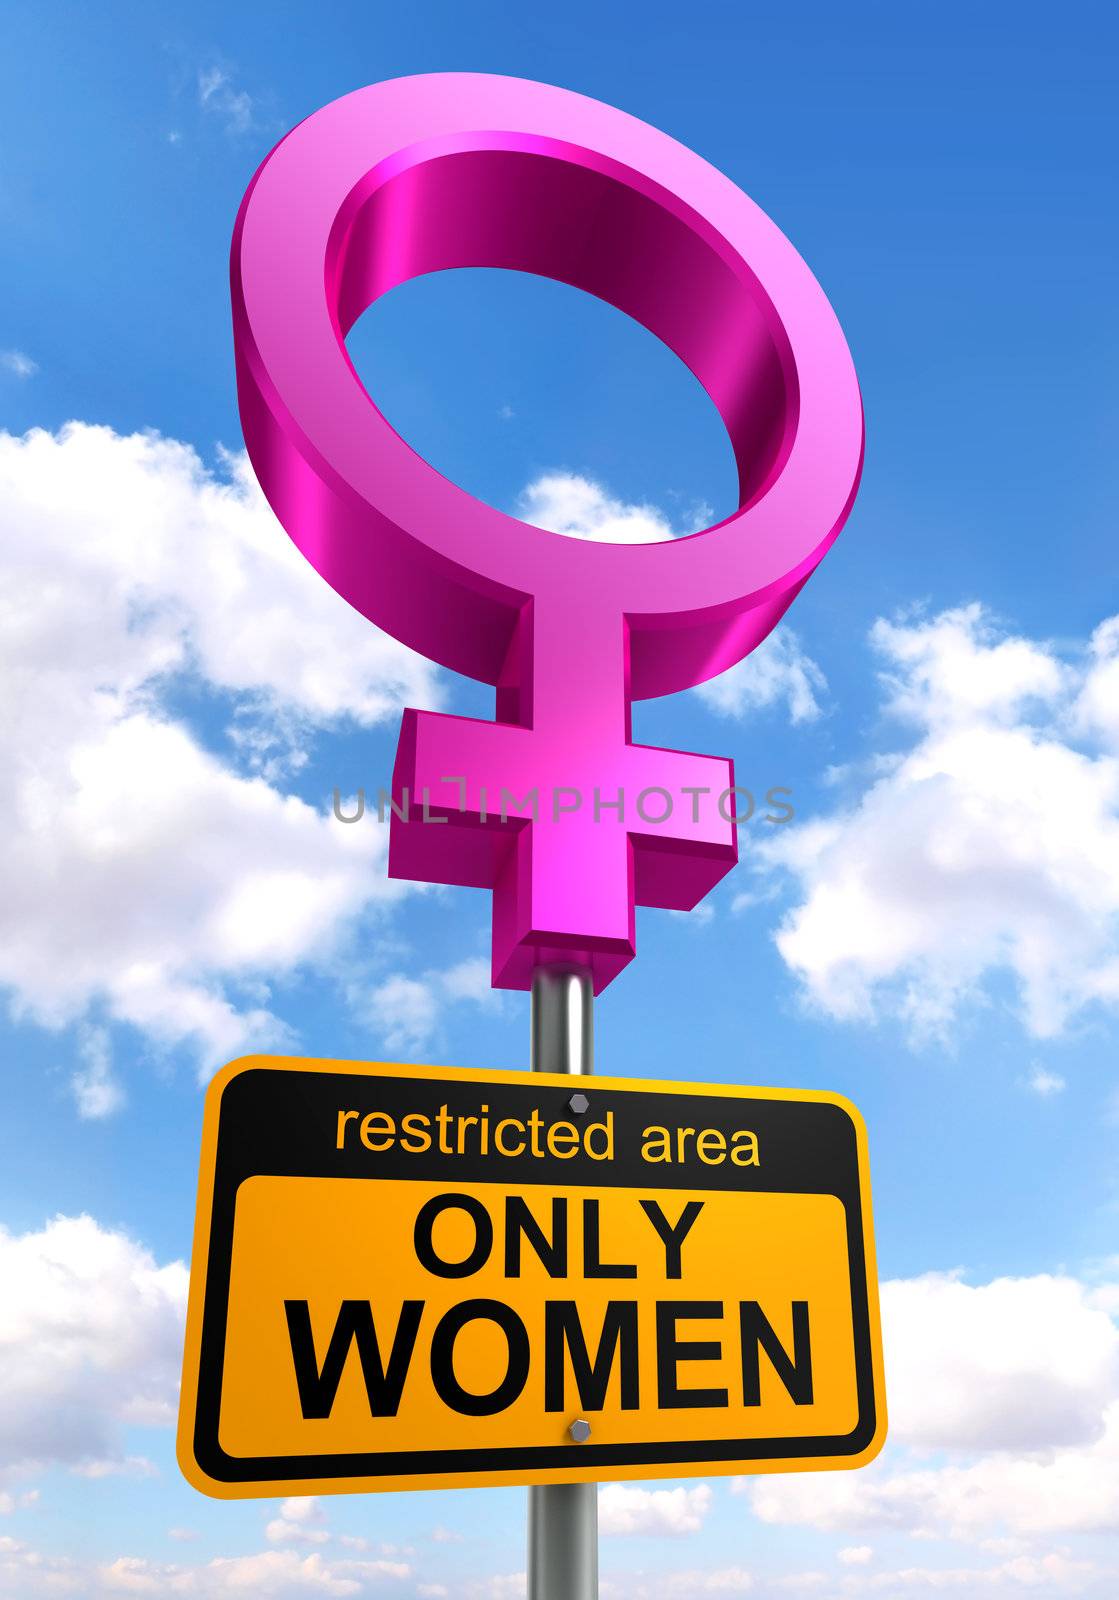 women only area road sign pink and ellow on sky background. clipping path included